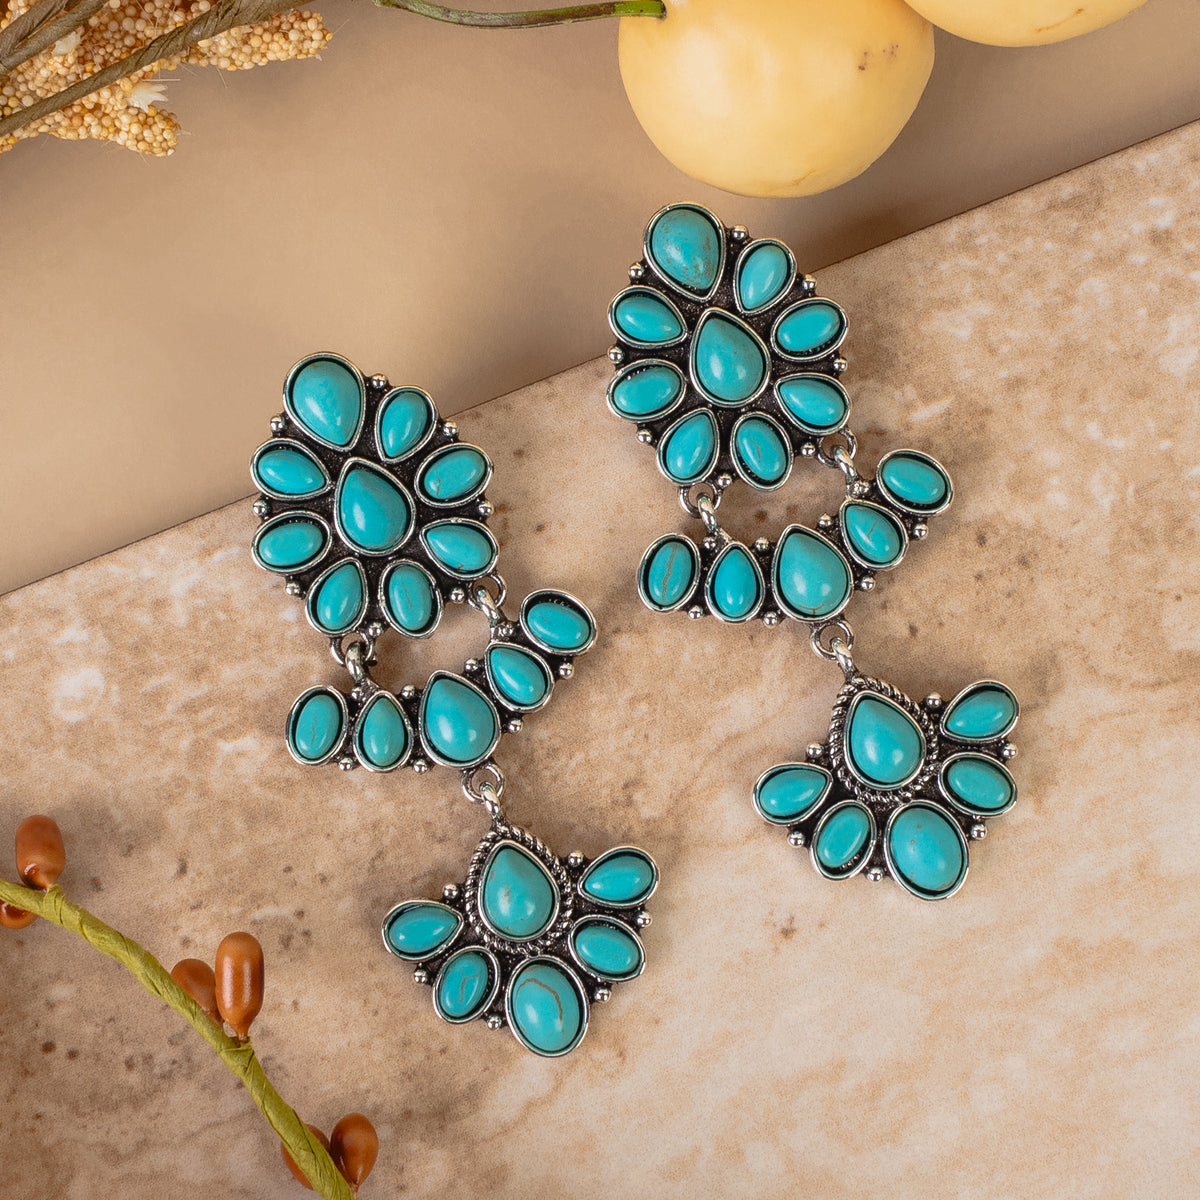 93281 - Squash Blossom Earrings - Turquoise & Silver